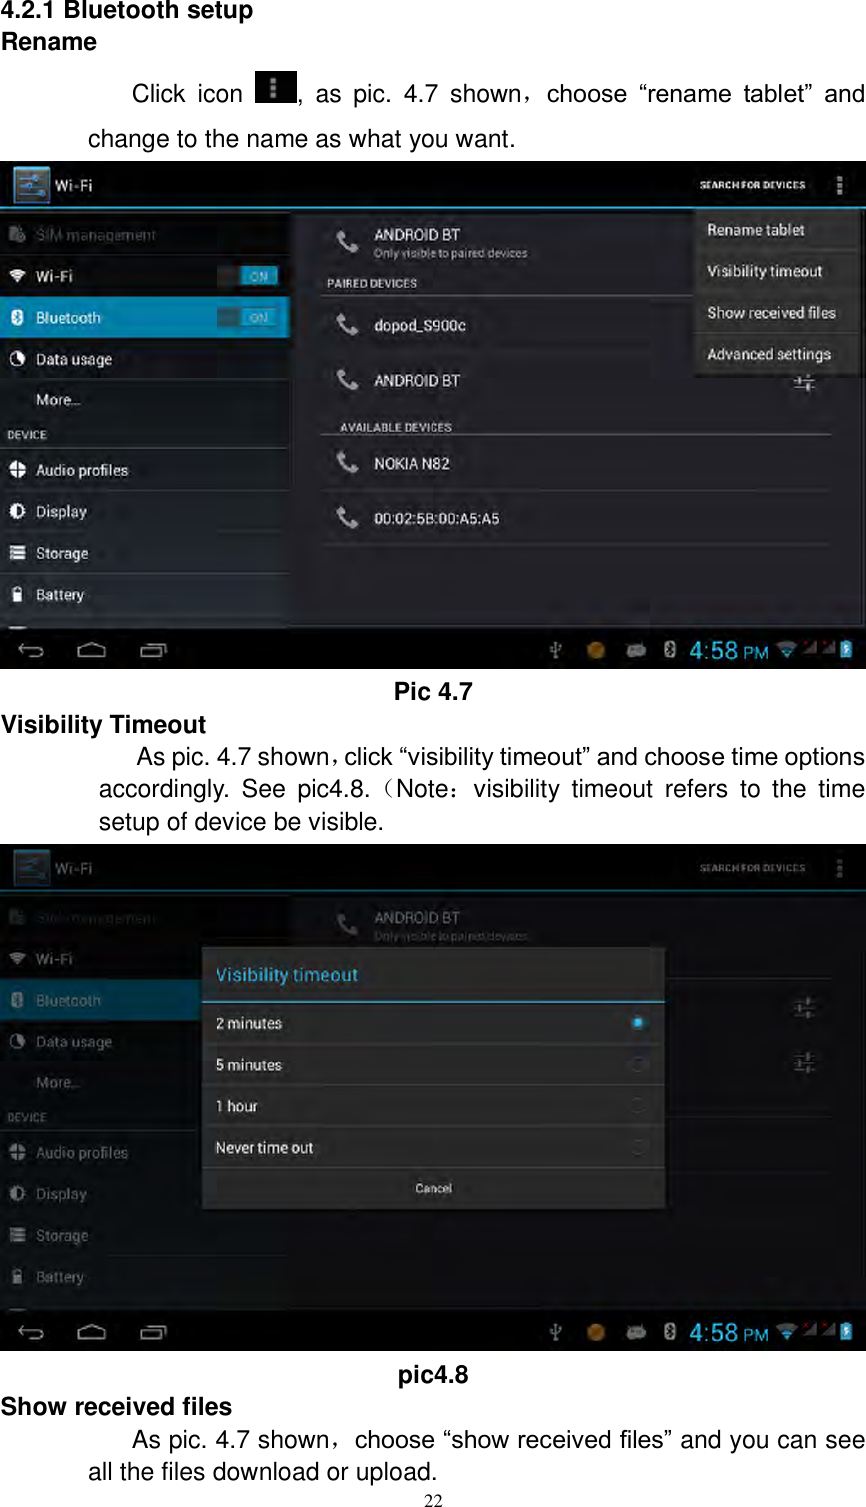      22 4.2.1 Bluetooth setup Rename Click  icon  ,  as  pic.  4.7  shown，choose  “rename  tablet”  and change to the name as what you want.    Pic 4.7 Visibility Timeout As pic. 4.7 shown，click “visibility timeout” and choose time options accordingly.  See  pic4.8.（Note：visibility  timeout  refers  to  the  time setup of device be visible.    pic4.8 Show received files As pic. 4.7 shown，choose “show received files” and you can see all the files download or upload.   